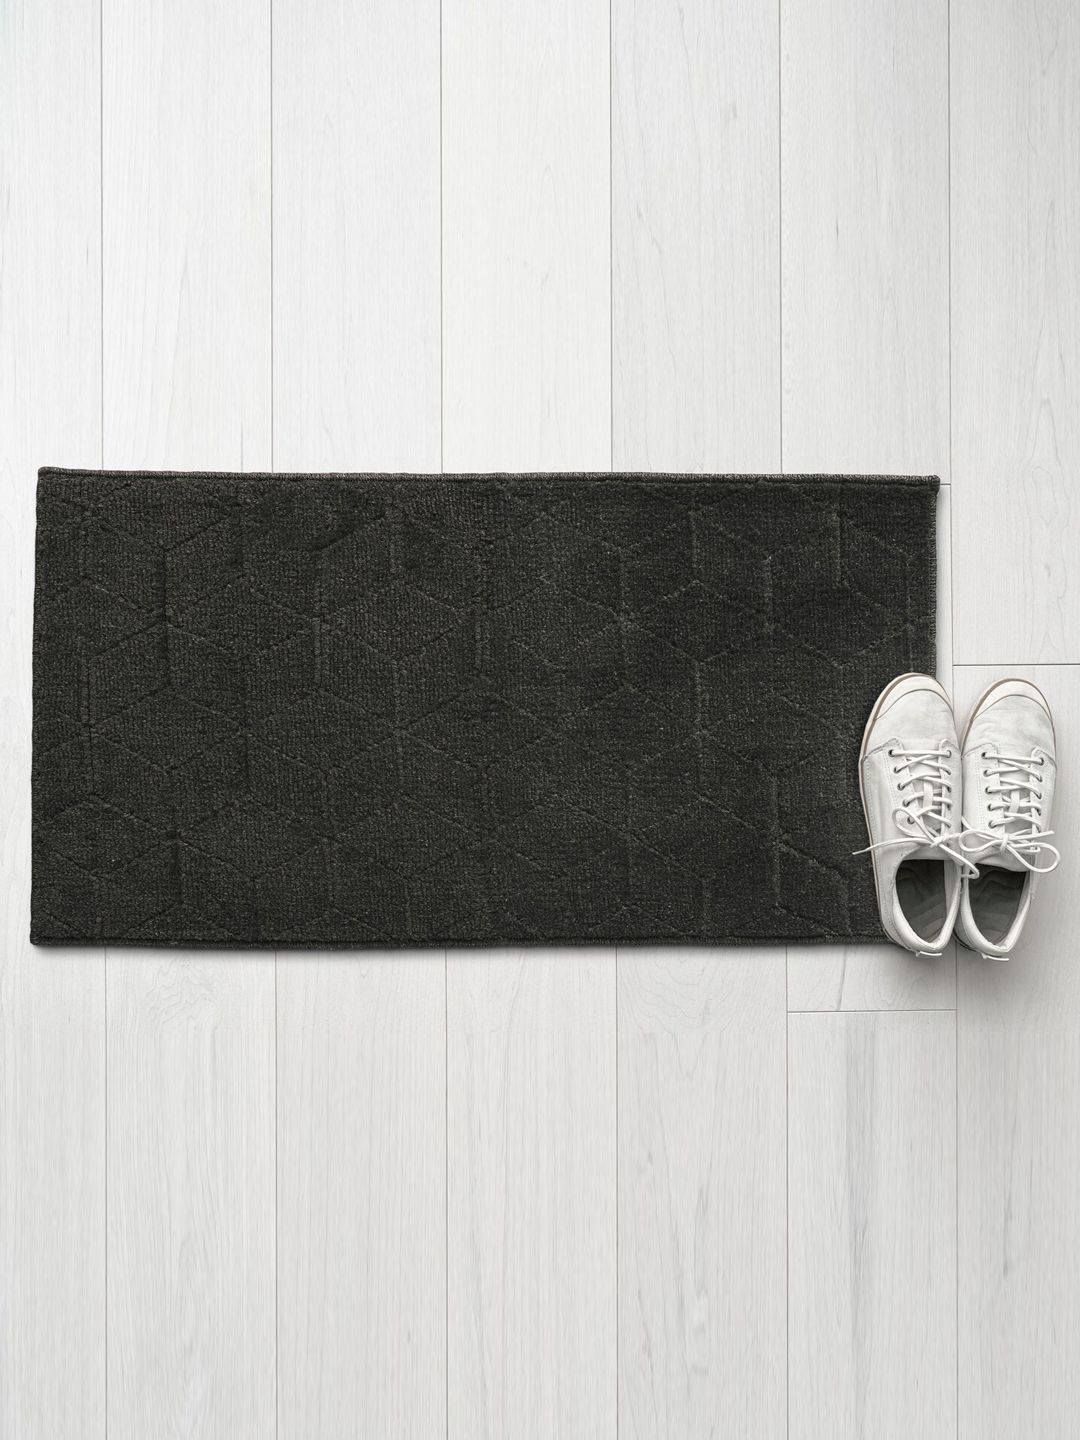 Saral Home Black Solid Cotton Anti-Skid Doormats Price in India